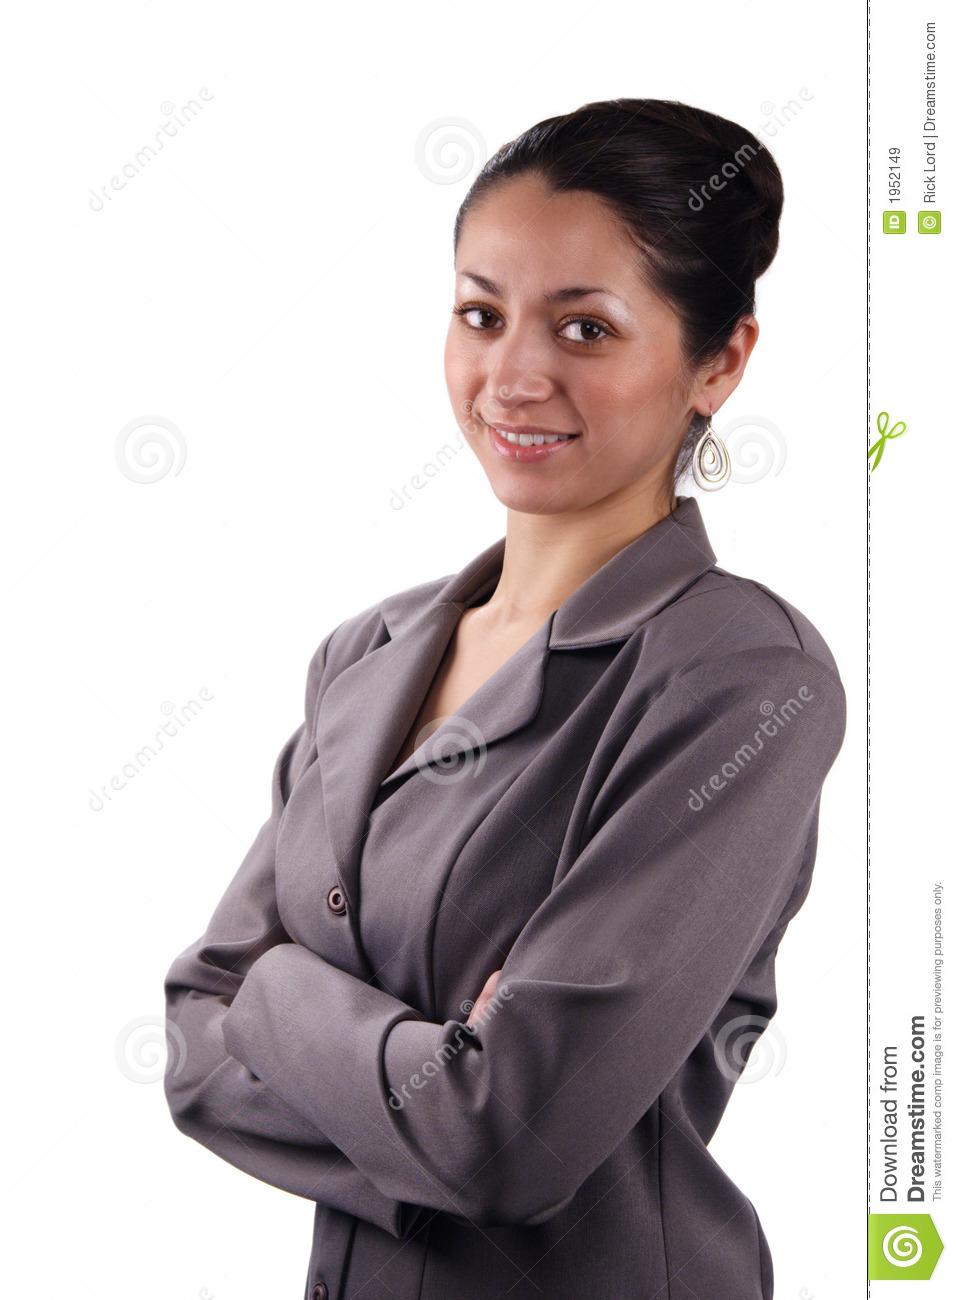 Stock Image Of A Smiling Latino Business Woman  Portrait Style    